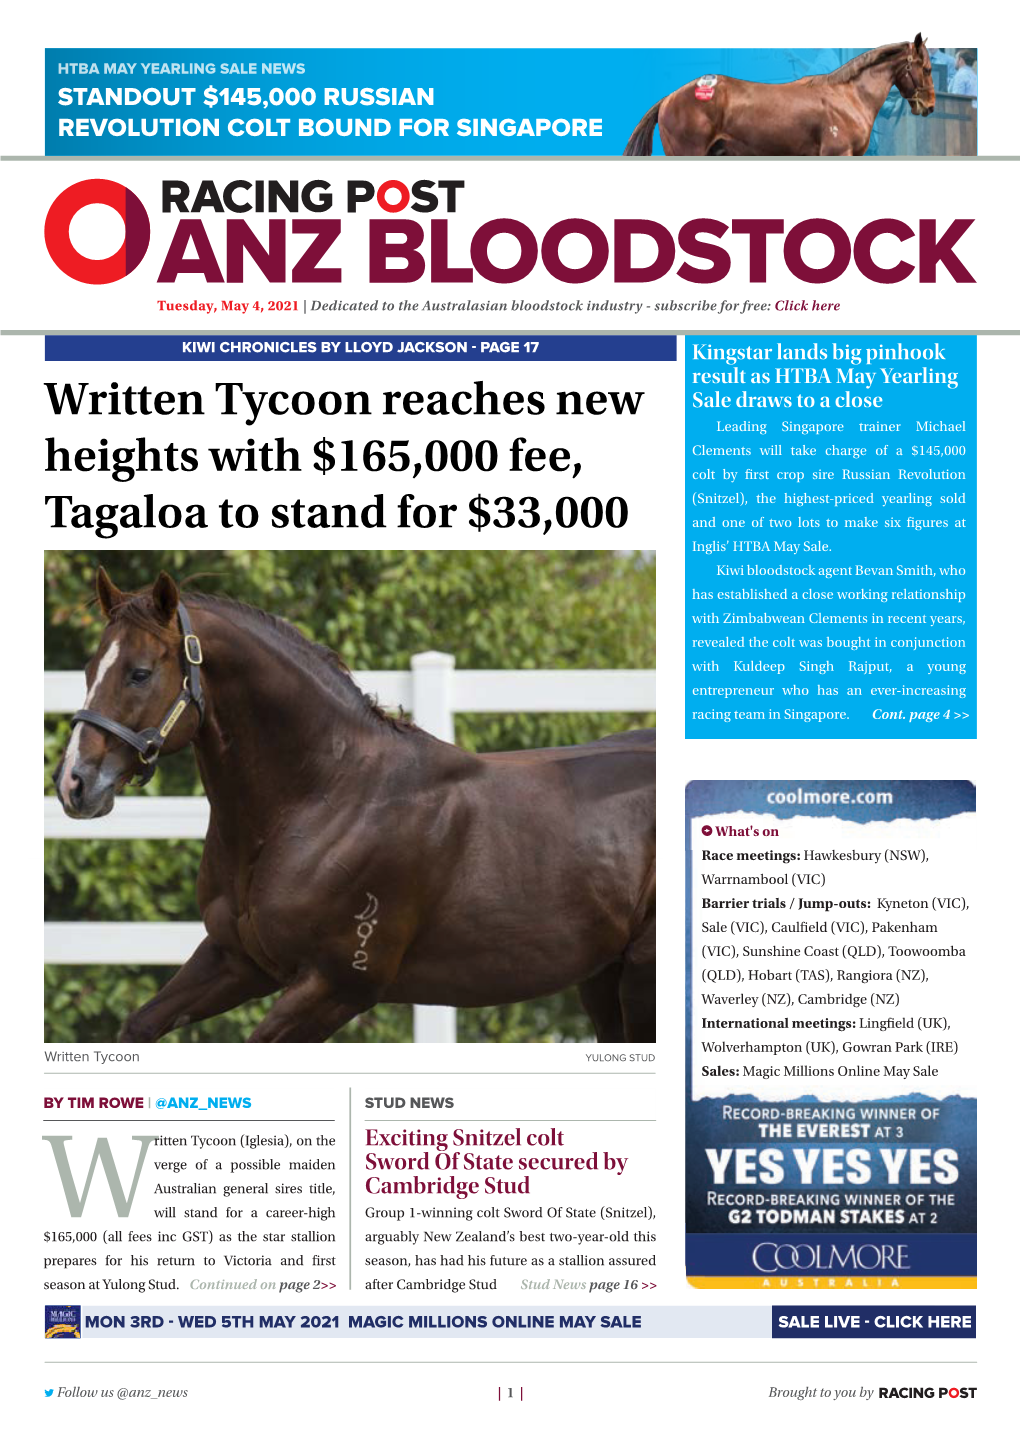 Written Tycoon Reaches New Heights with $165,000 Fee, Tagaloa to Stand